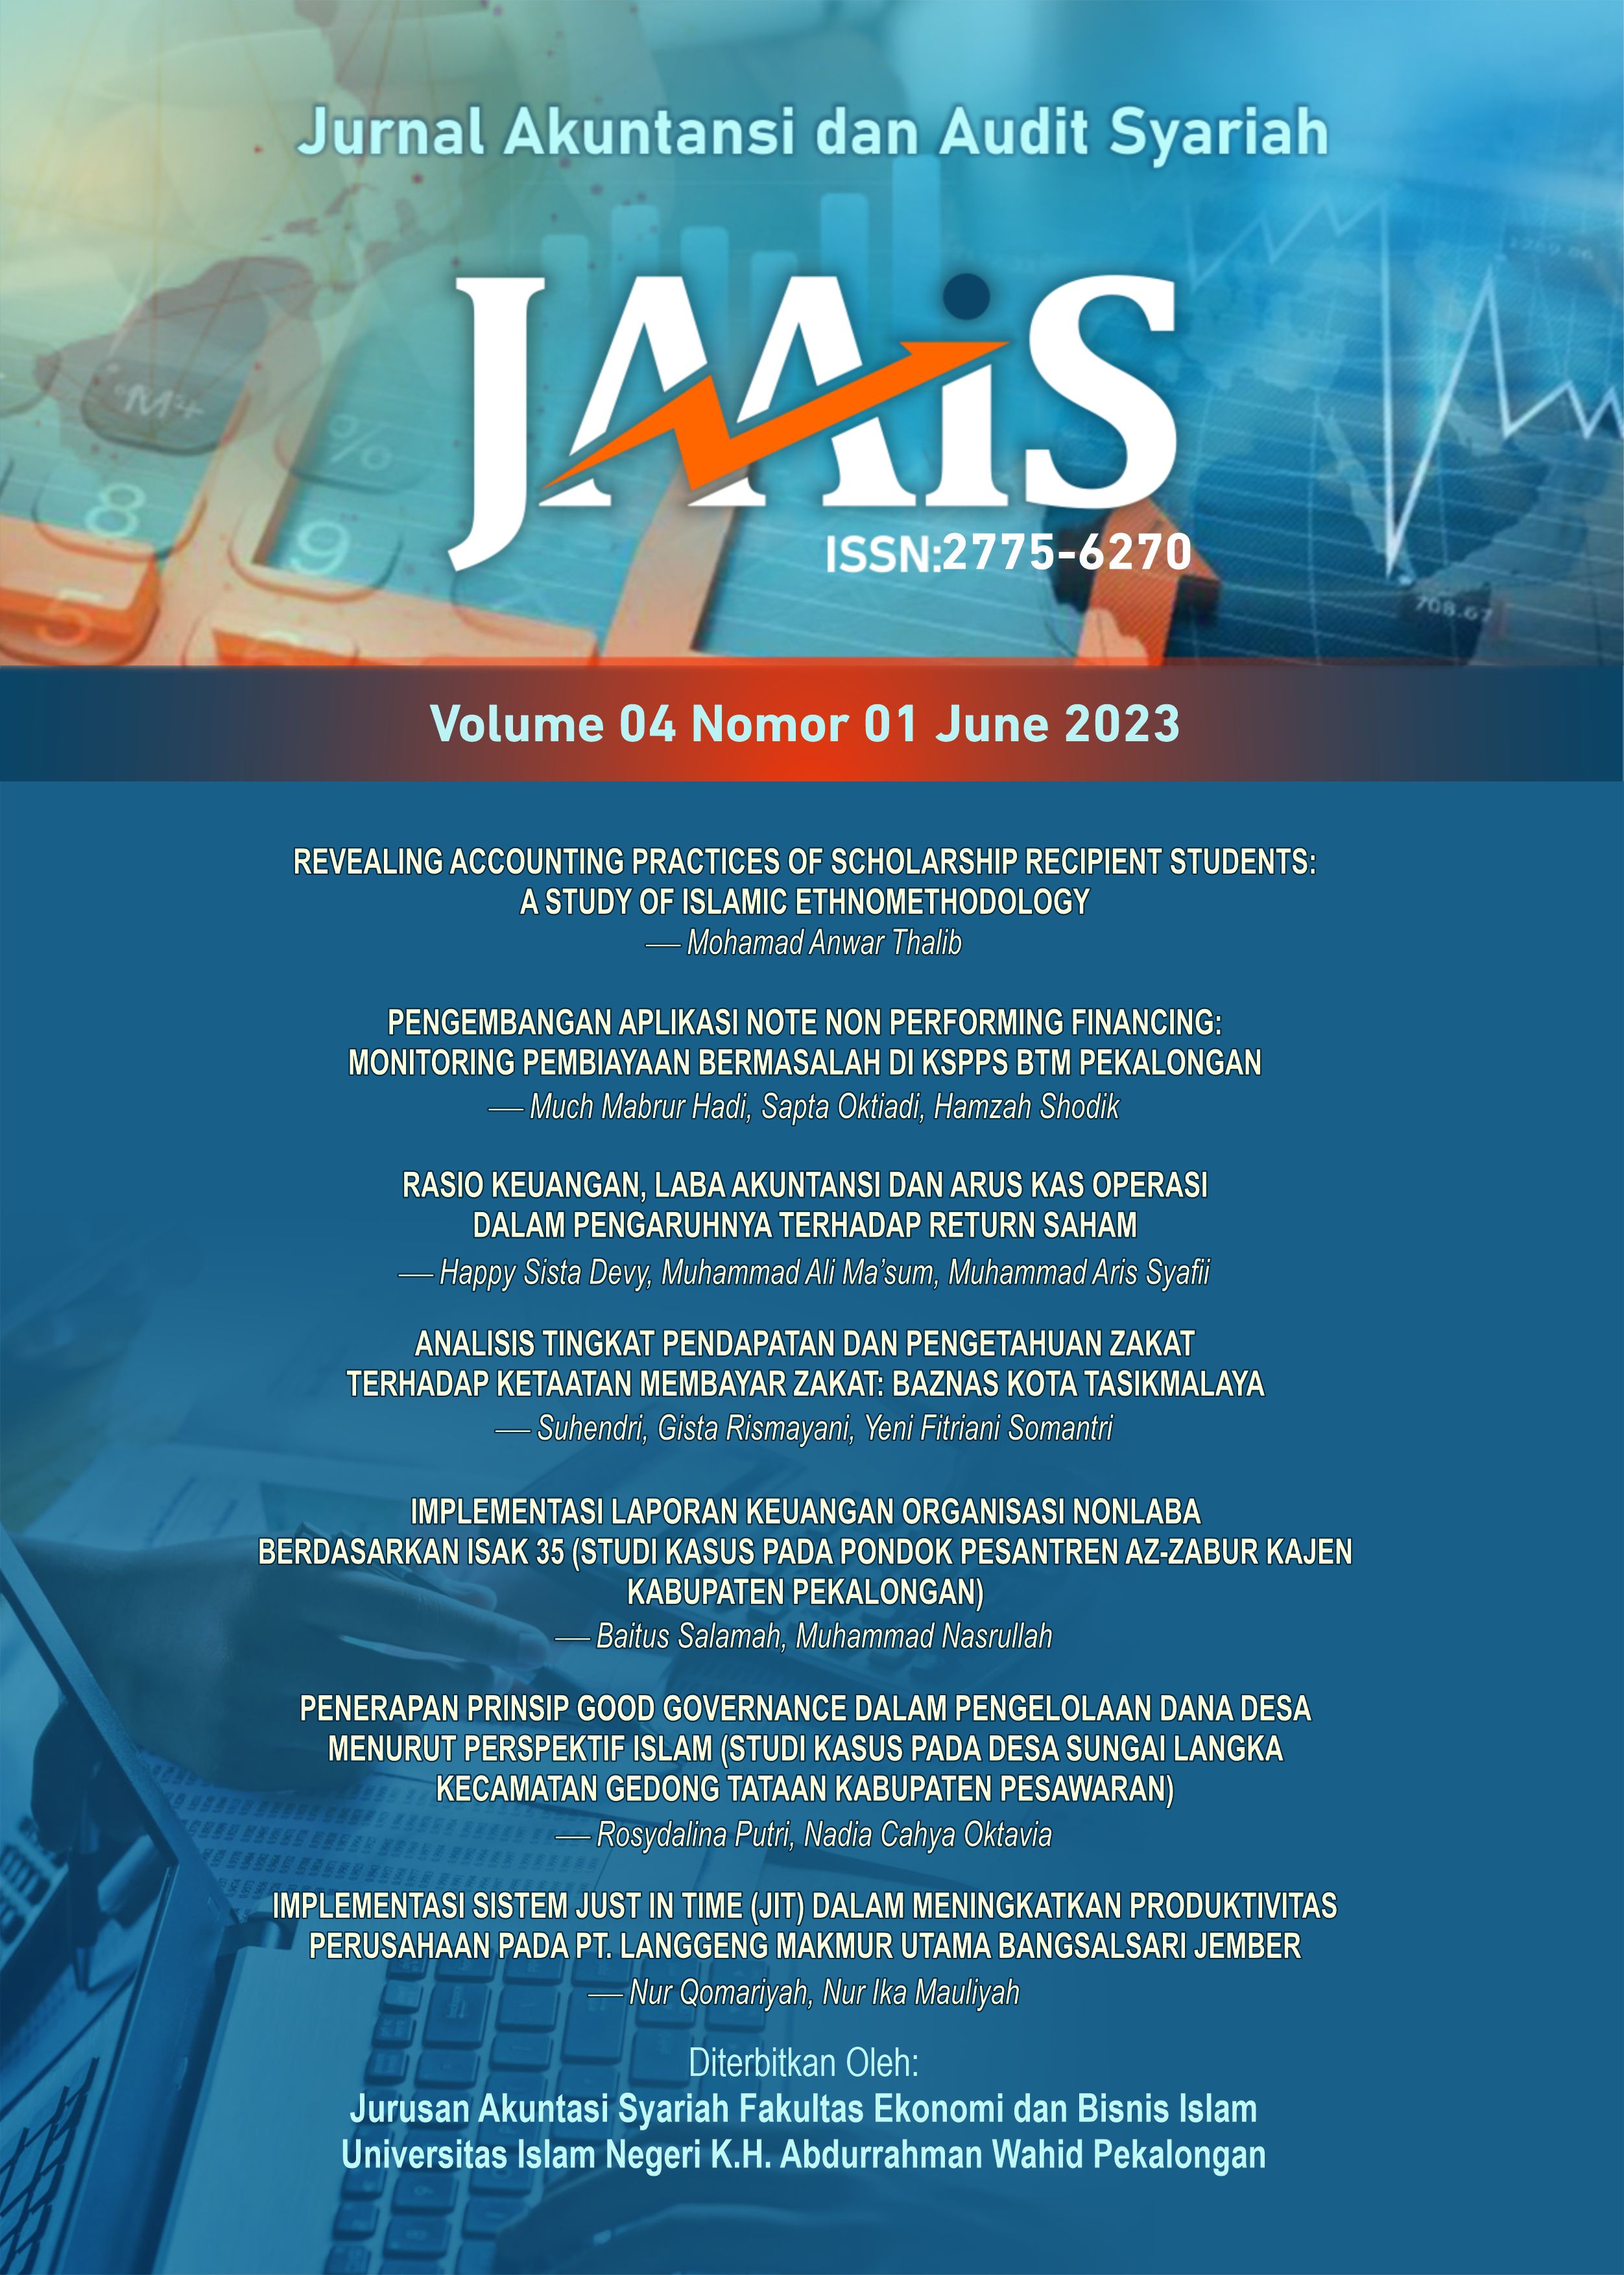 Jurnal Akuntansi dan Audit Syariah (JAAiS) is an journal providing authoritative source of scientific information for researchers and scholars in academia, research institutions, government agencies, and industries. ISSN Print is 2775-6270 and ISSN Online is 2775-8443. We publish original research papers, review articles and case studies focused on Islamic Accounting and Auditing as well as related topics. All papers are peer-reviewed by at least two reviewers. Jurnal Akuntansi dan Audit Syariah (JAAiS) released on a regular basis (every six months, on June and December). Jurnal Akuntansi dan Audit Syariah (JAAiS) is published and printed by Sharia Accounting Study Program Faculty of Islamic Economics and Business of Islamic State University (UIN) K.H Abdurrahman Wahid Pekalongan.